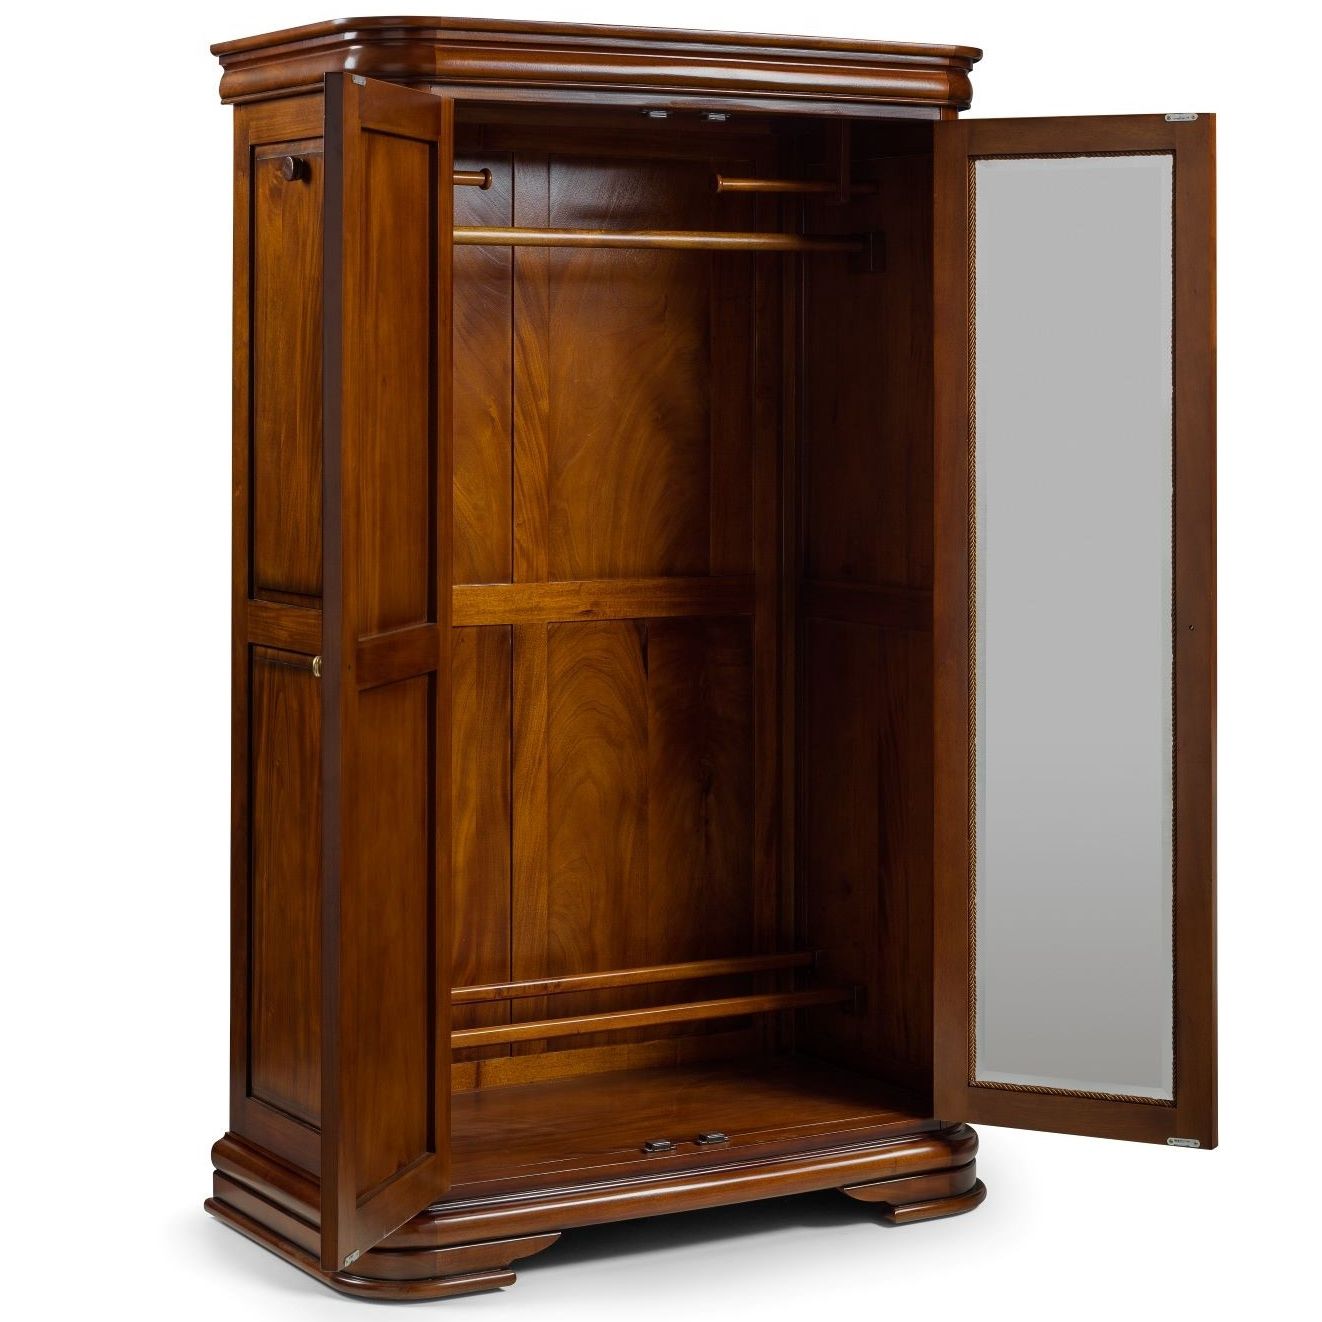 Antoinette French Sleigh Double Wardrobe | Traditional French Wardrobes |  French Bedroom Furniture | Sleigh Wardrobe Within Mahogany Wardrobes (View 11 of 15)